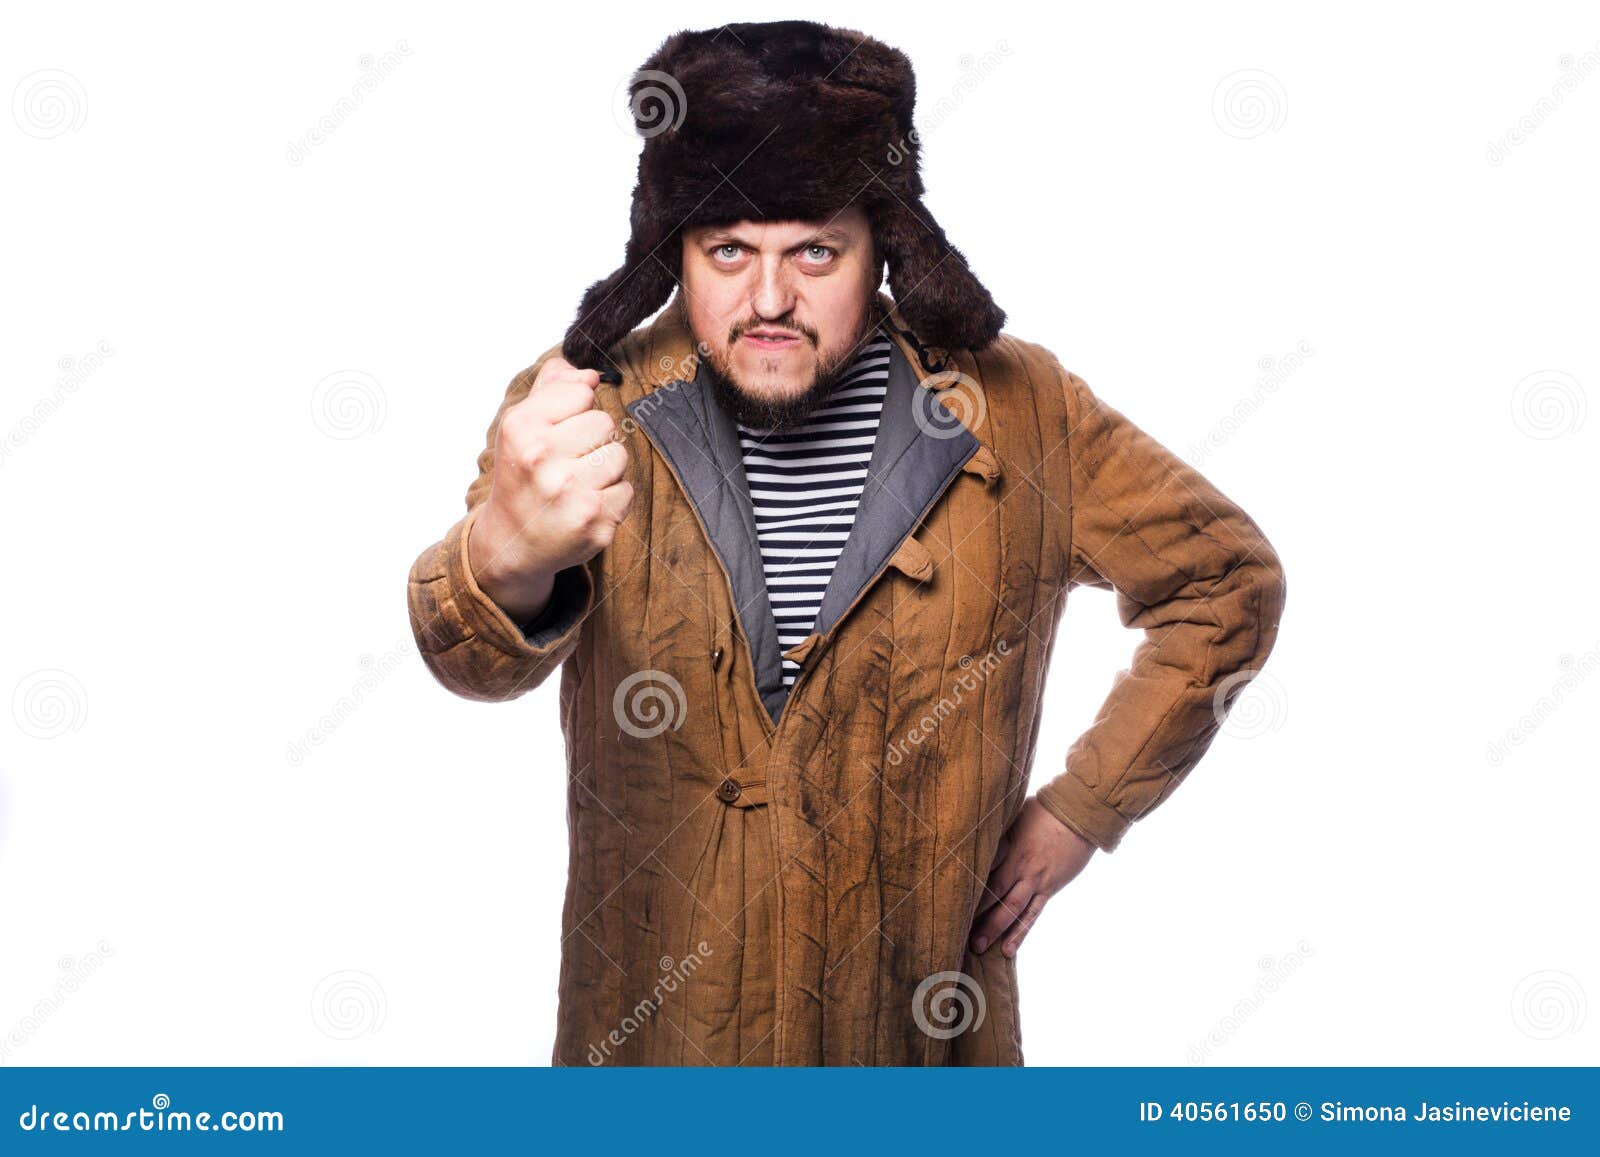 angry russian man threaten with a fist